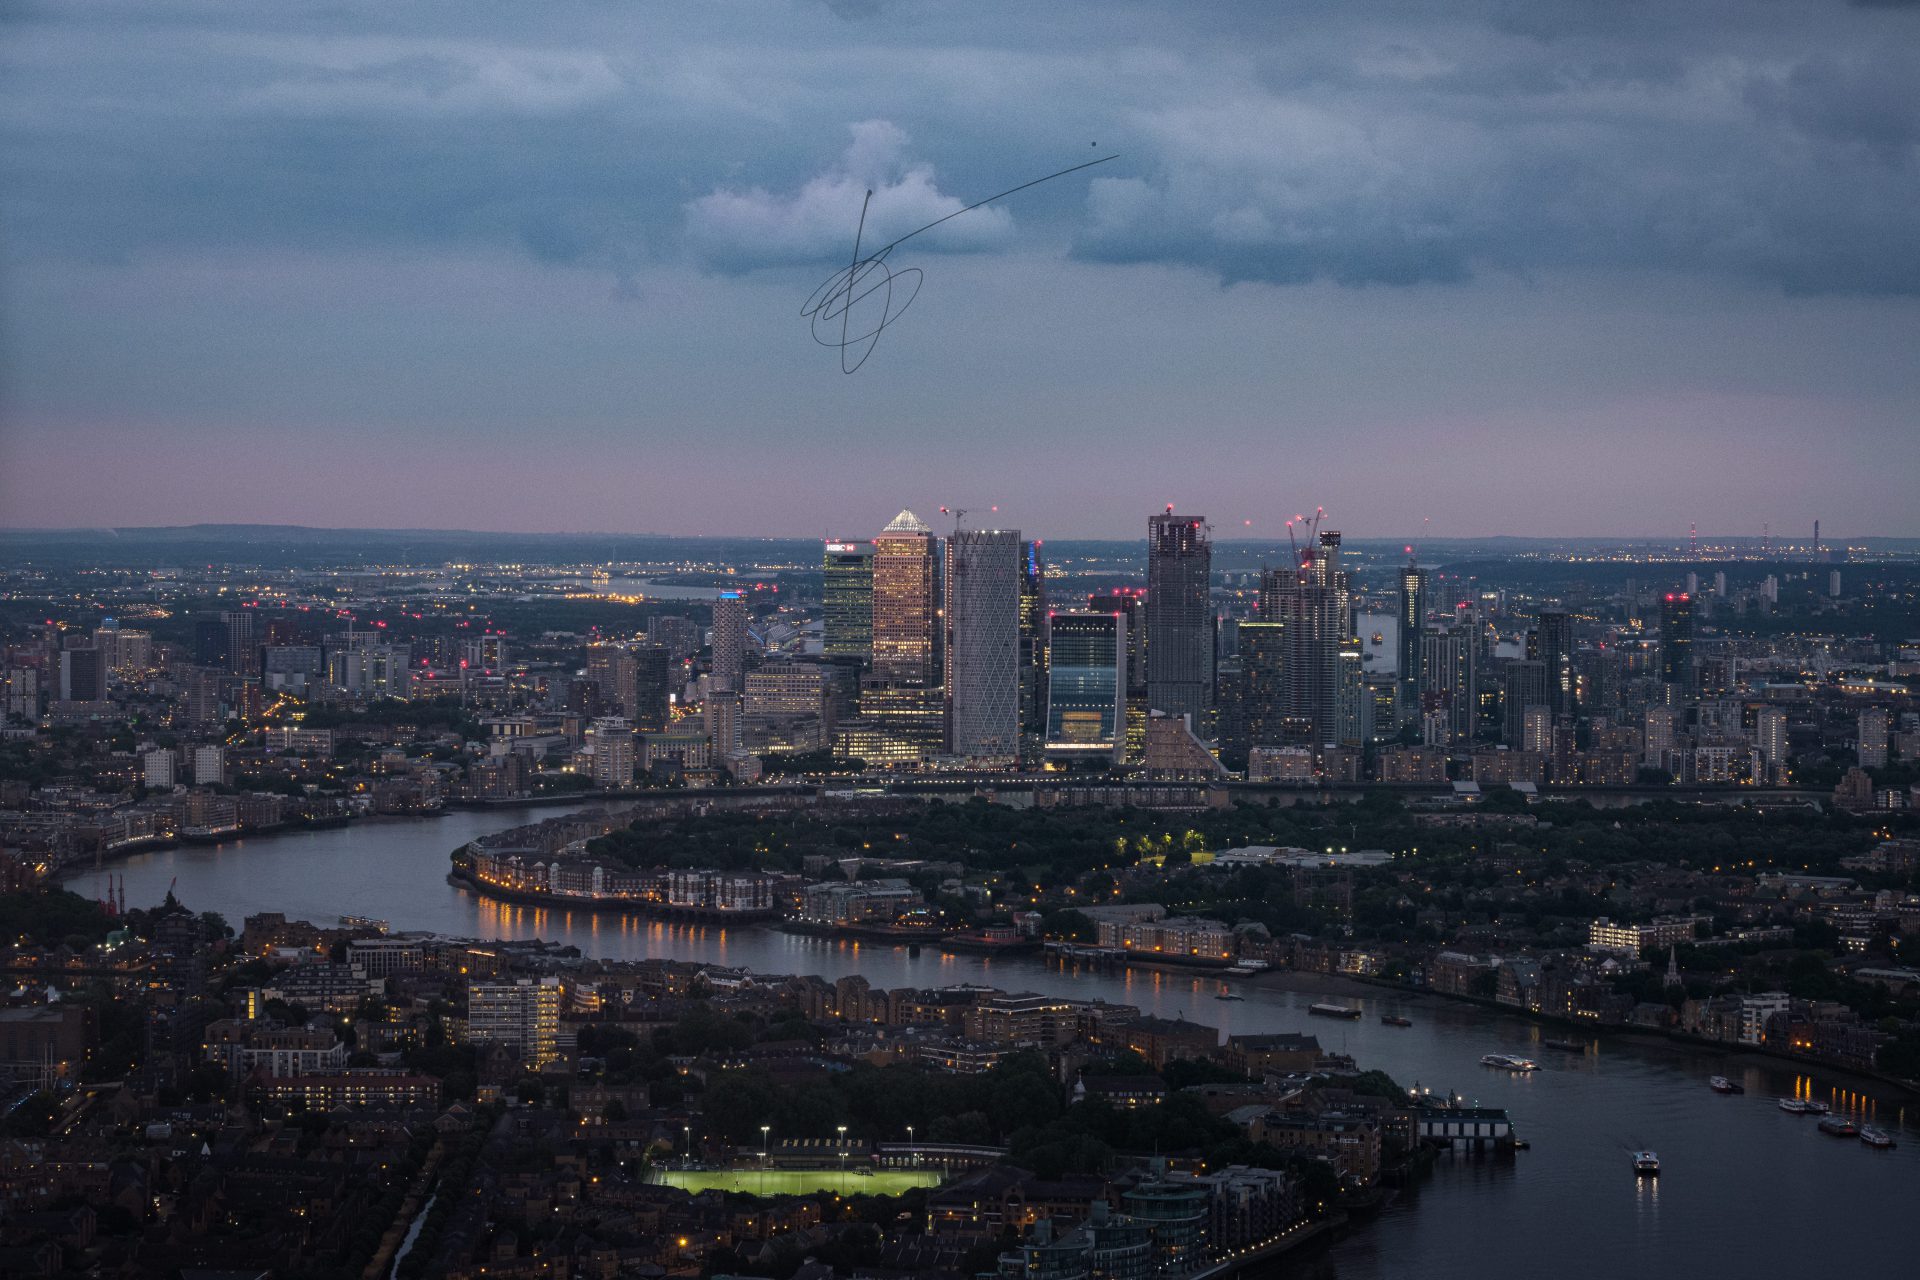 Canary Wharf viewed from the Shard